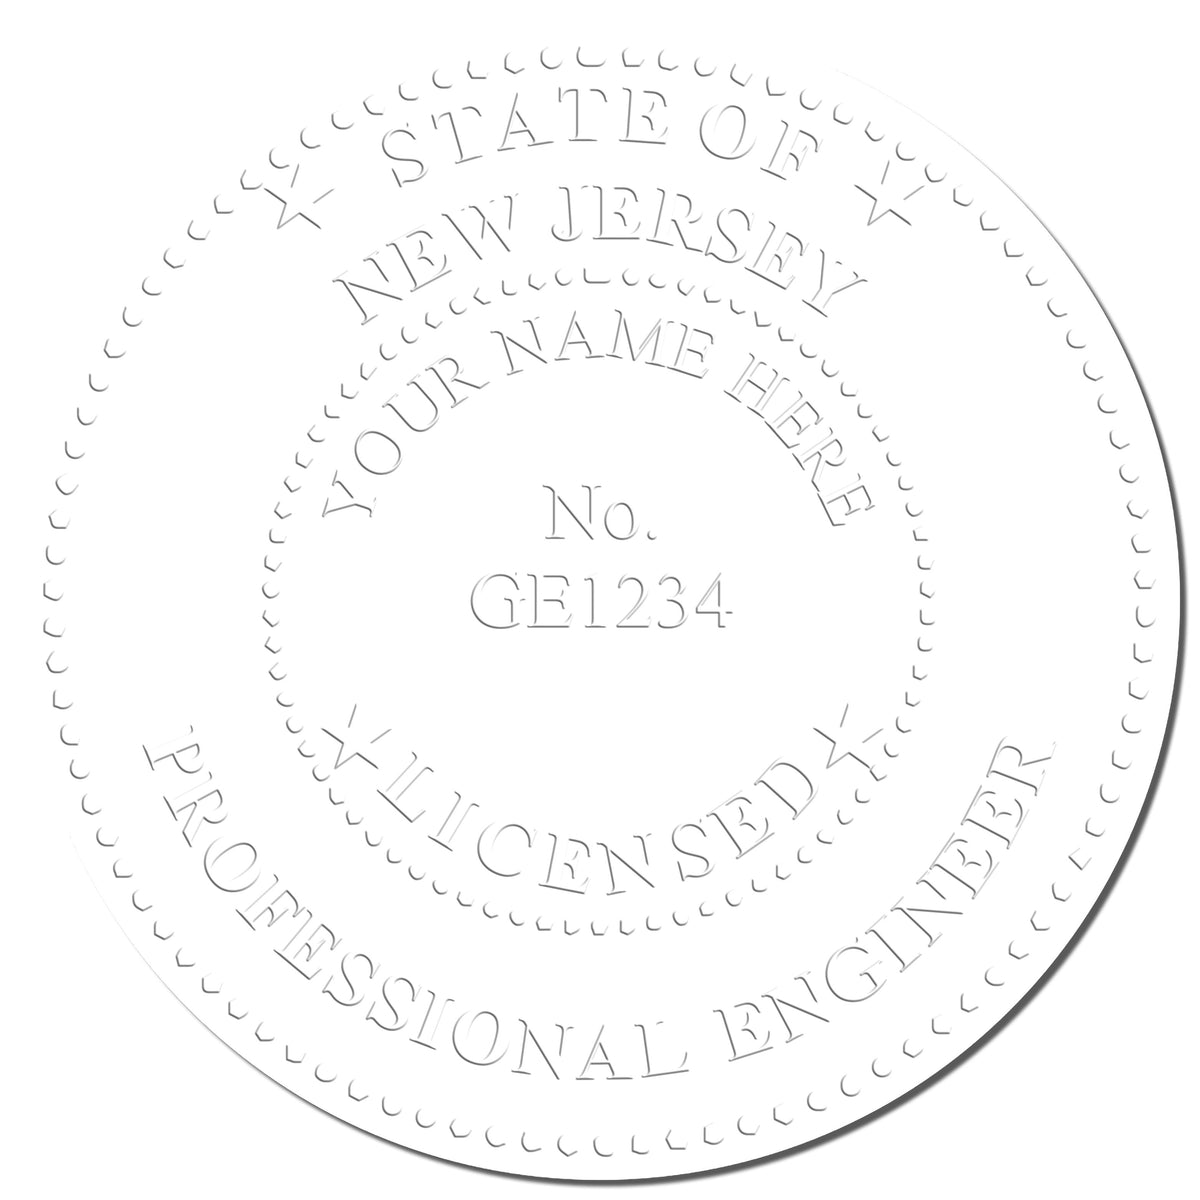 The Soft New Jersey Professional Engineer Seal stamp impression comes to life with a crisp, detailed photo on paper - showcasing true professional quality.